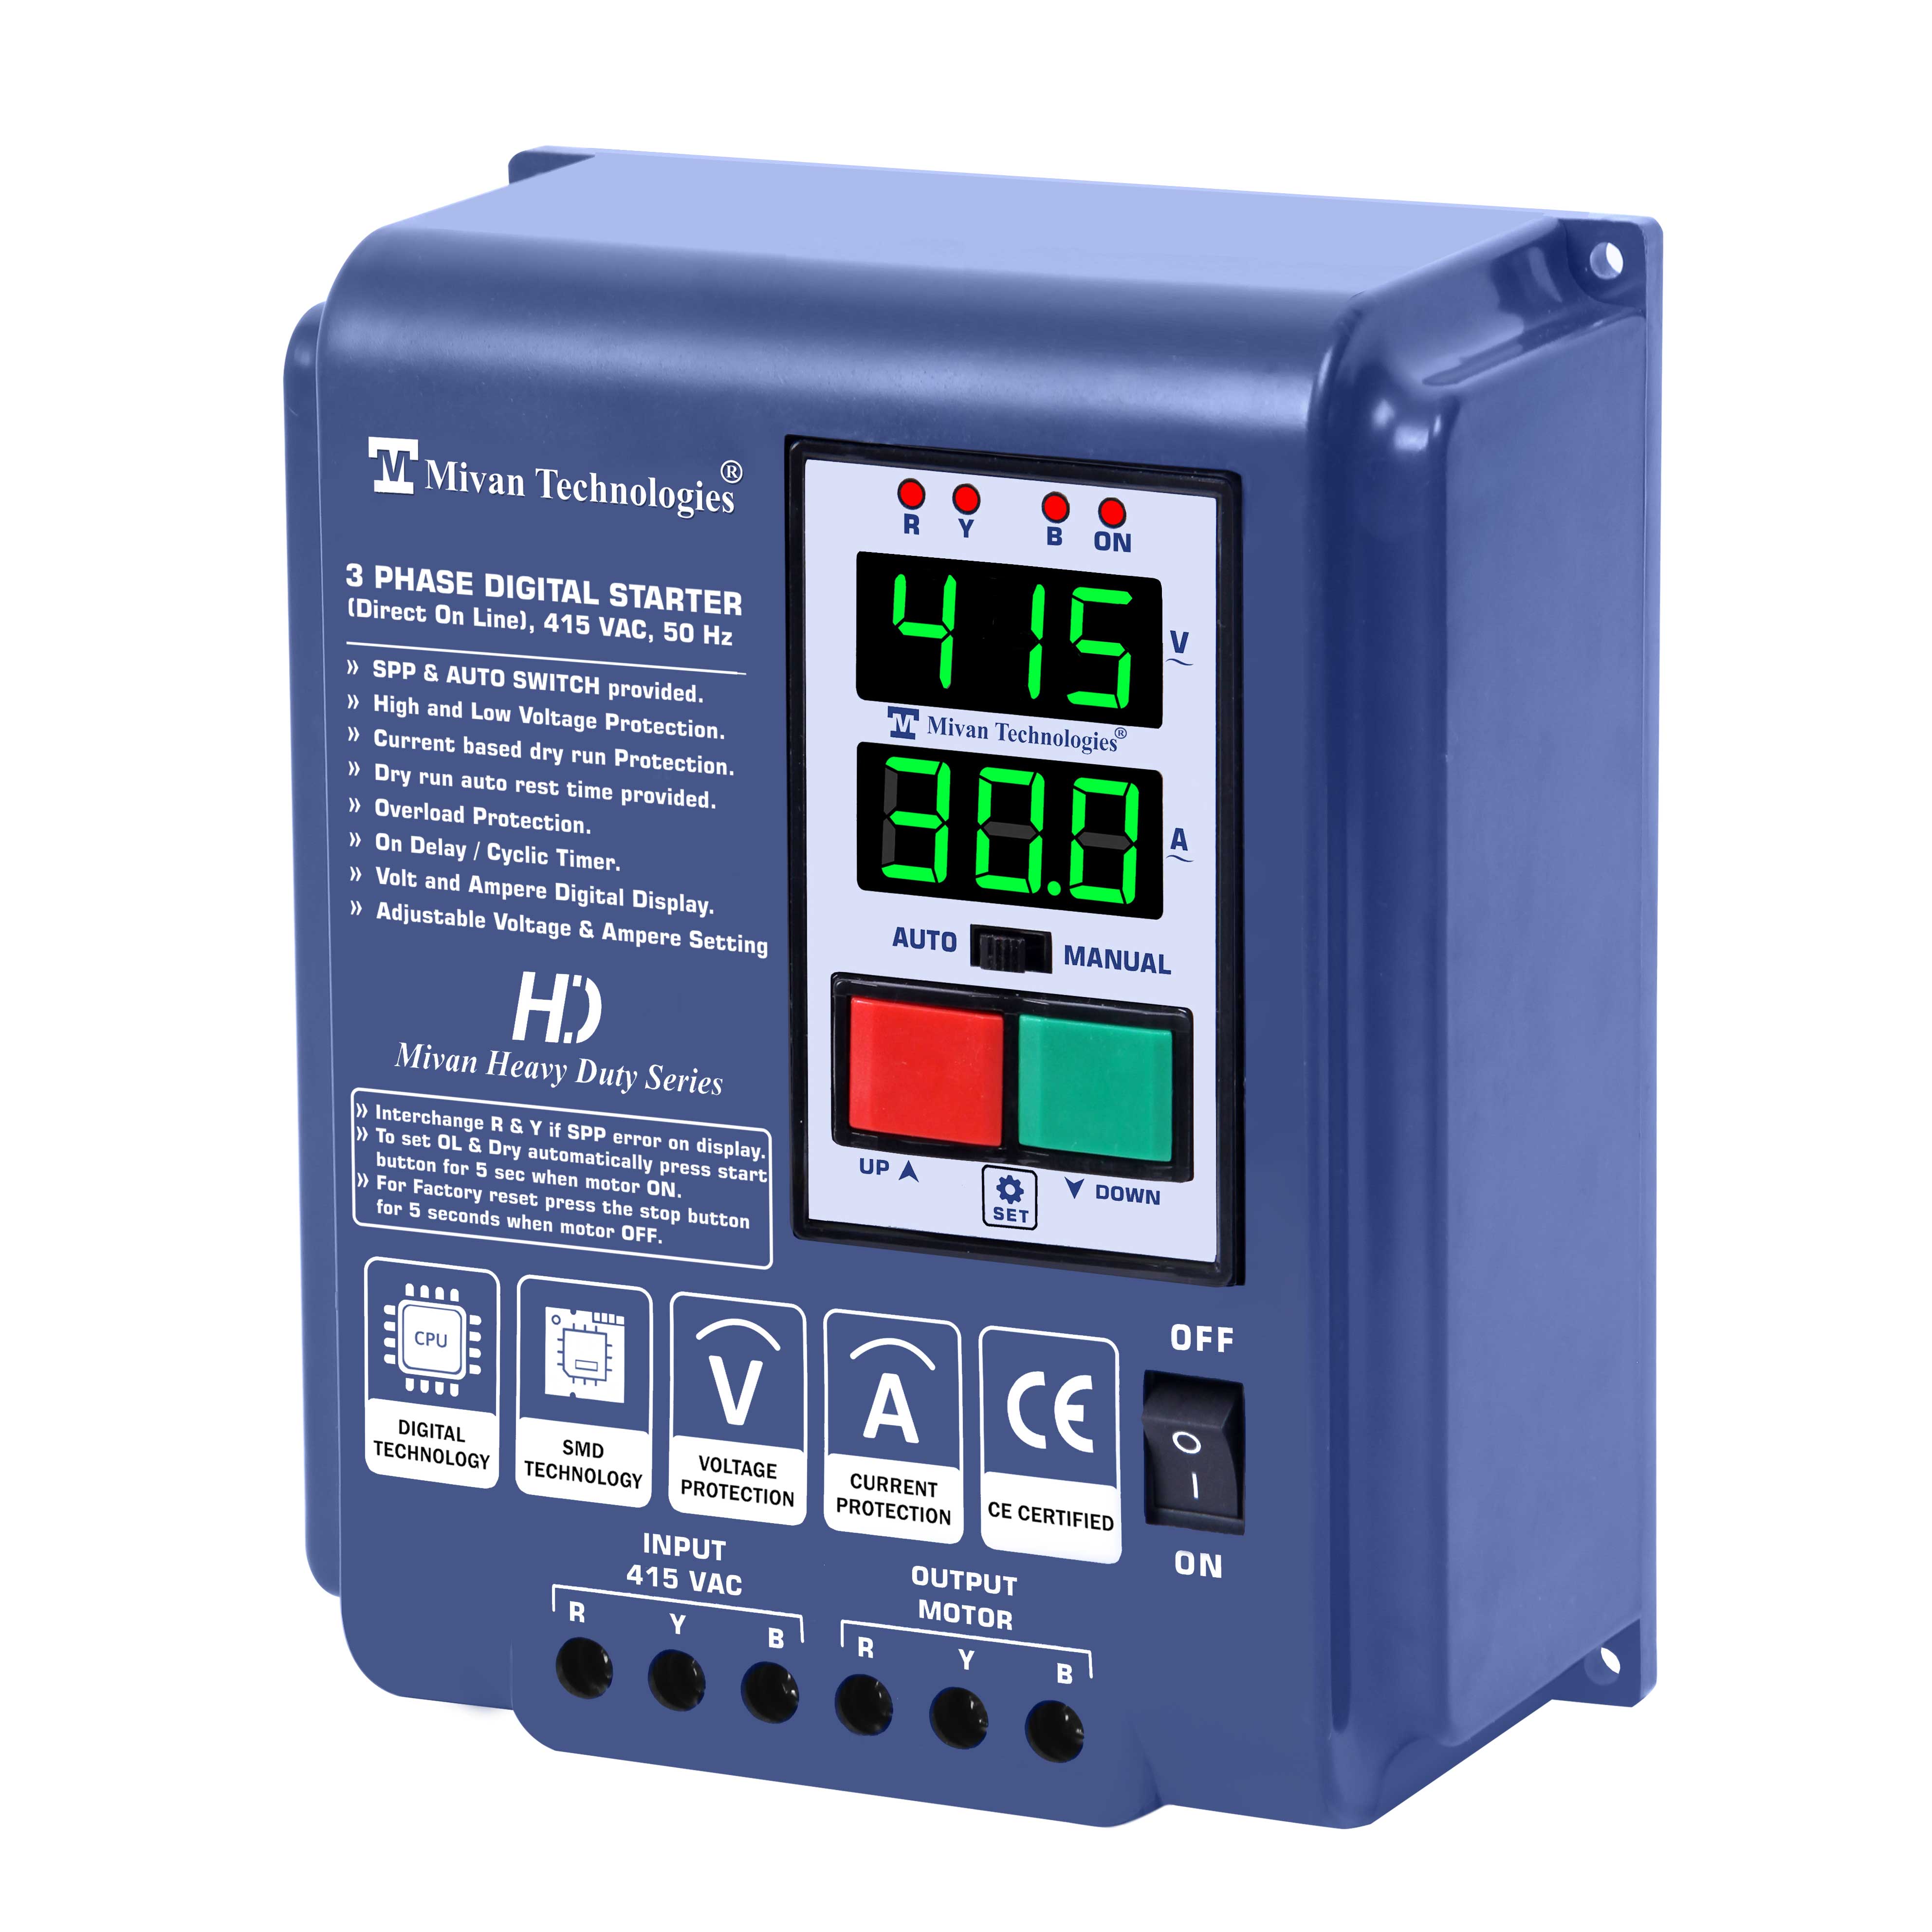 DP 301S HD 3 Phase DOL Digital Starter for 3 Phase Motor Suitable up to 10 hp Motor with HV LV OL Dry protections with SPP Auto switch and cyclic timer